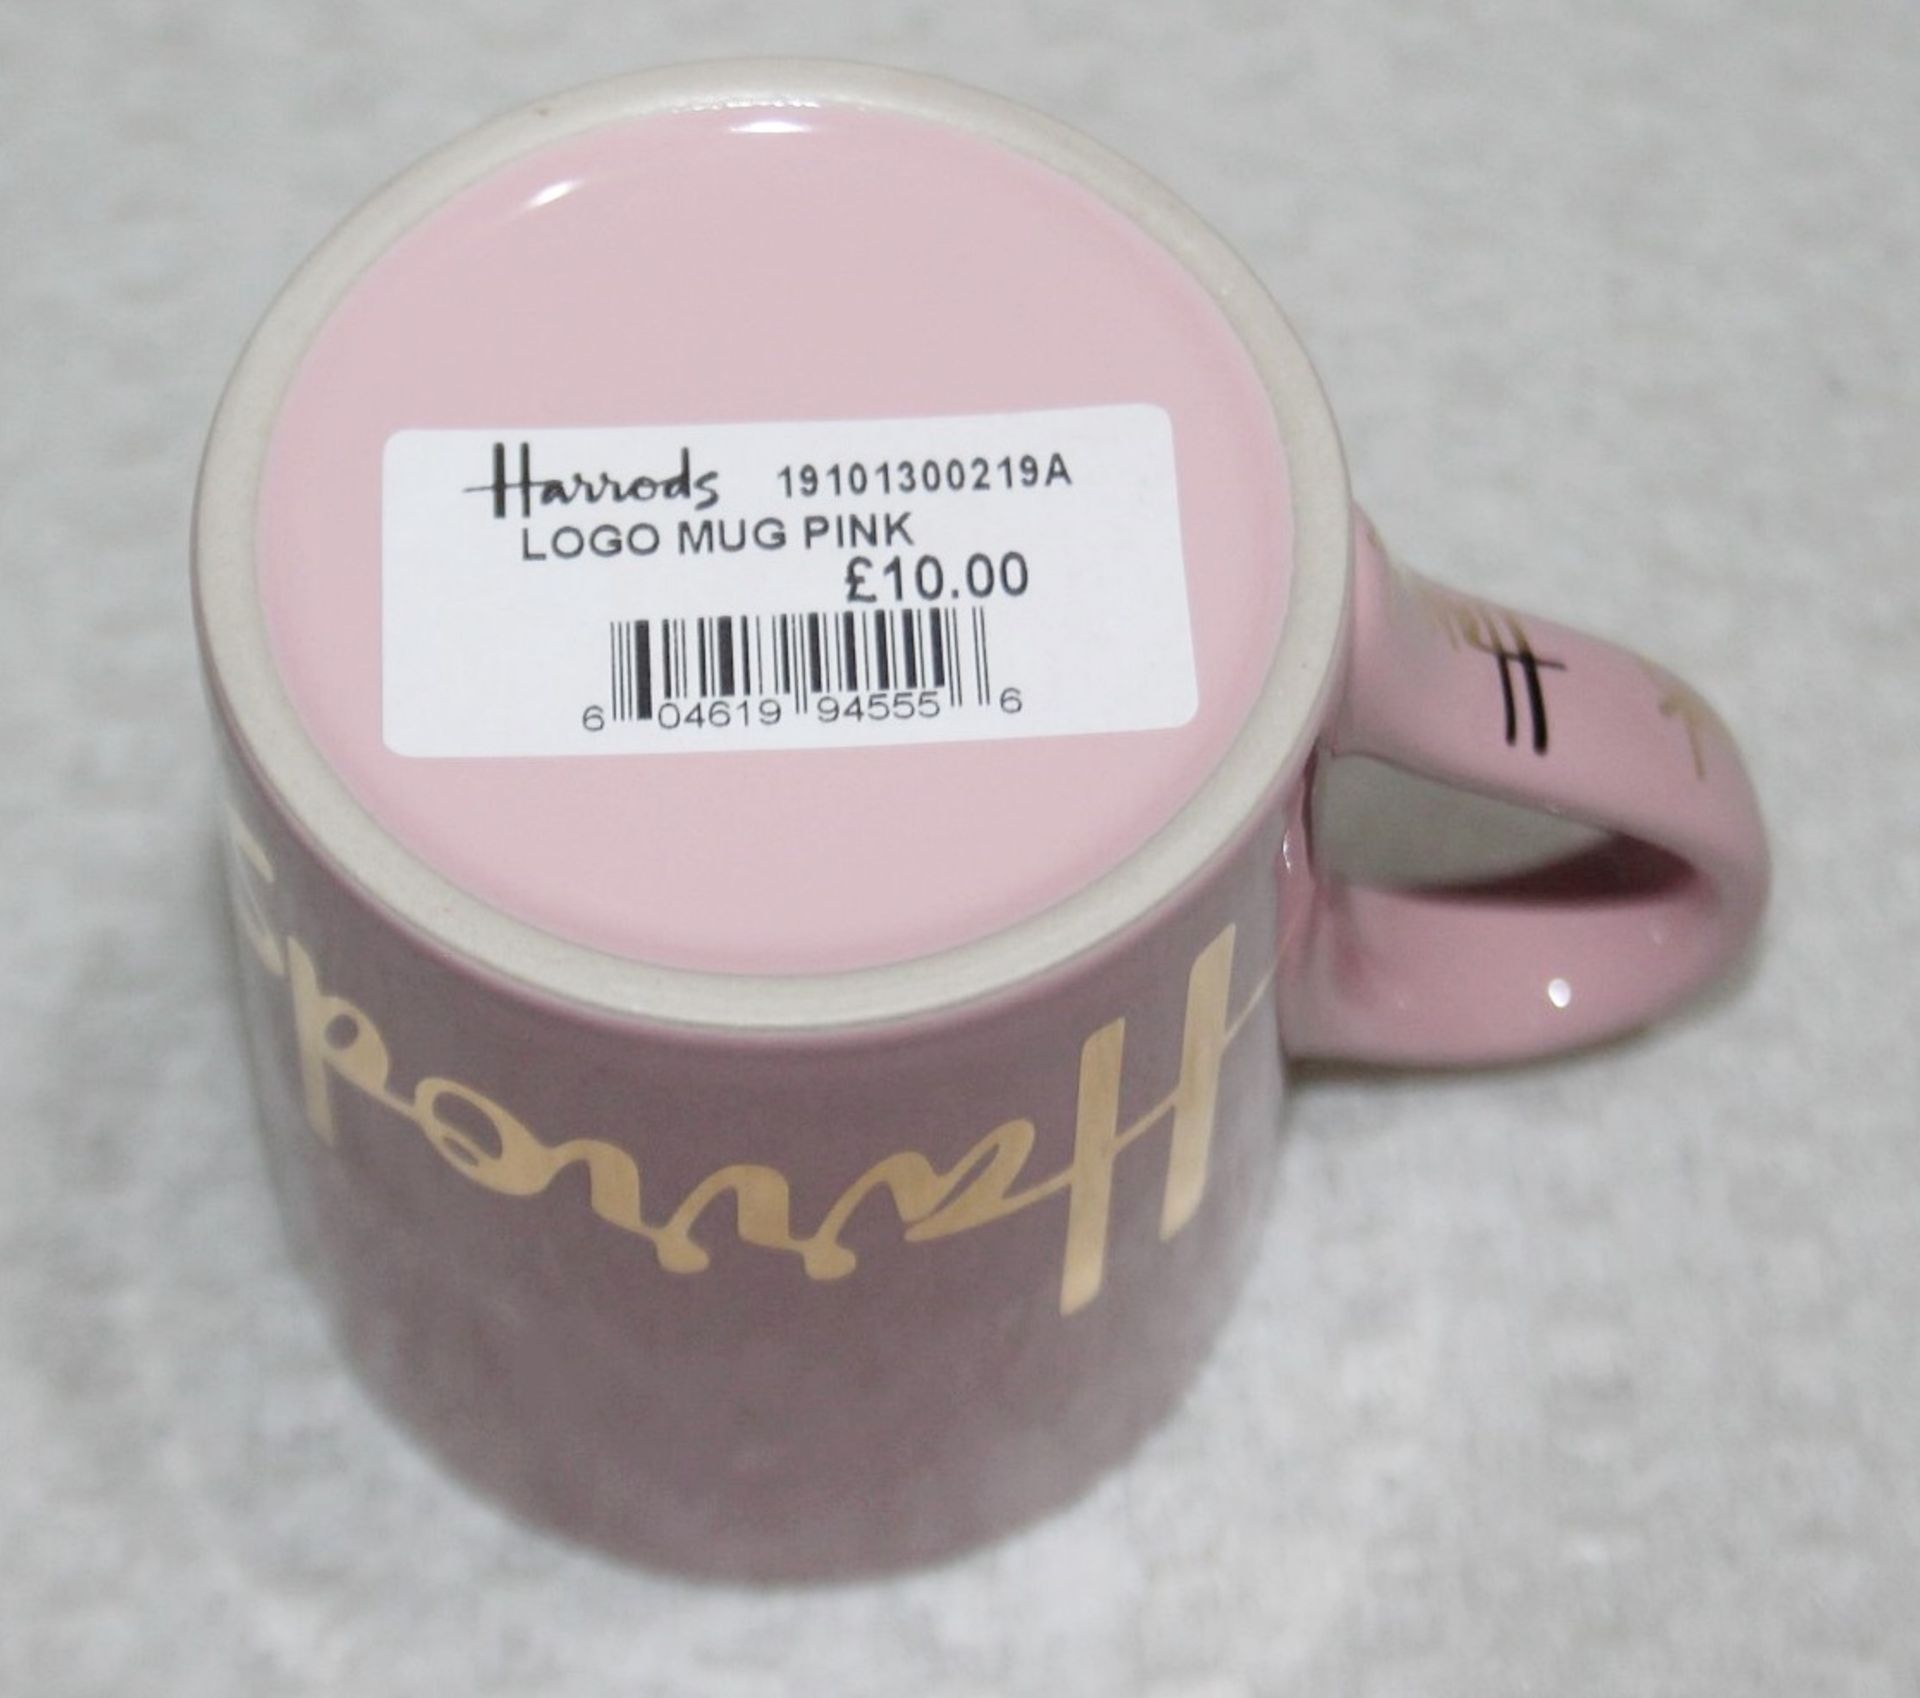 Set Of 6 x HARRODS Branded Mugs In Pink With Gold-Tone Logo Design - Dimensions: 9cm x 8cm - - Image 4 of 7